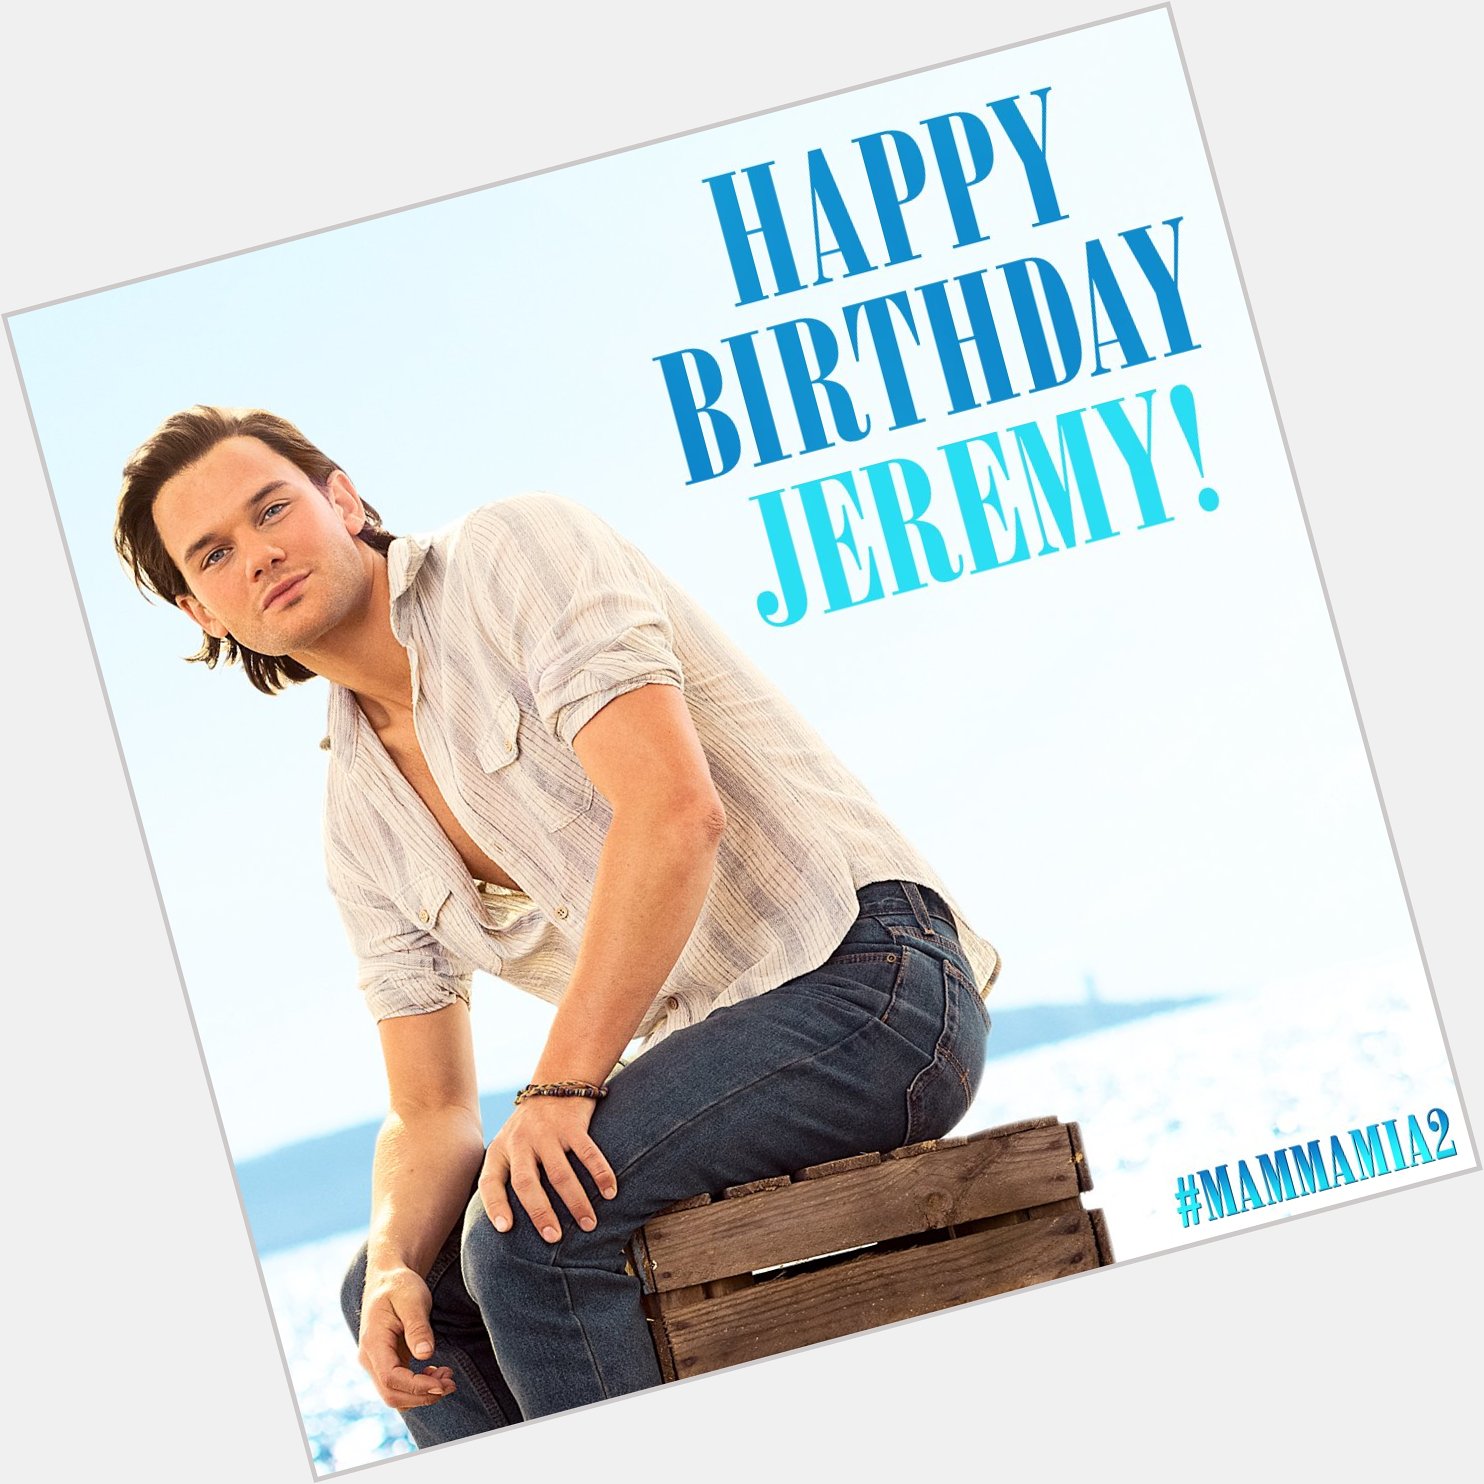 Happy birthday to our young Sam, Jeremy Irvine! 